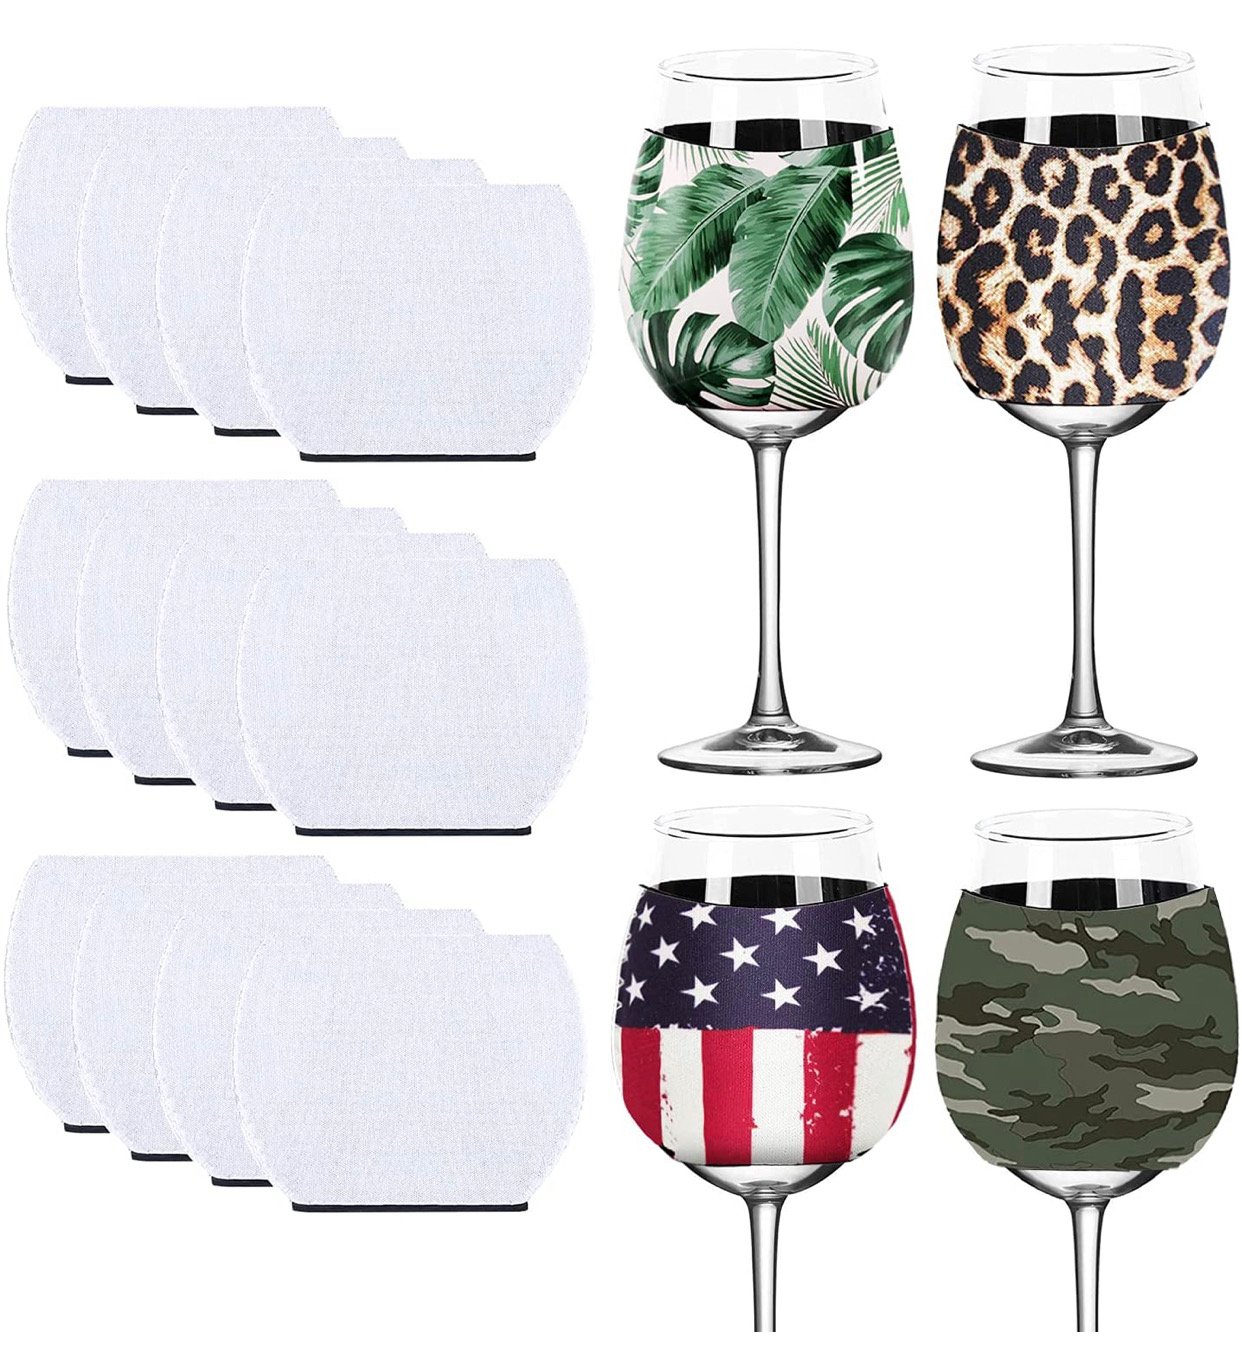 https://assets.bigcartel.com/product_images/26f71851-c446-49b5-8806-647a302e1cd7/sublimation-wine-glass-koozies-4-pack.jpg?auto=format&fit=max&...